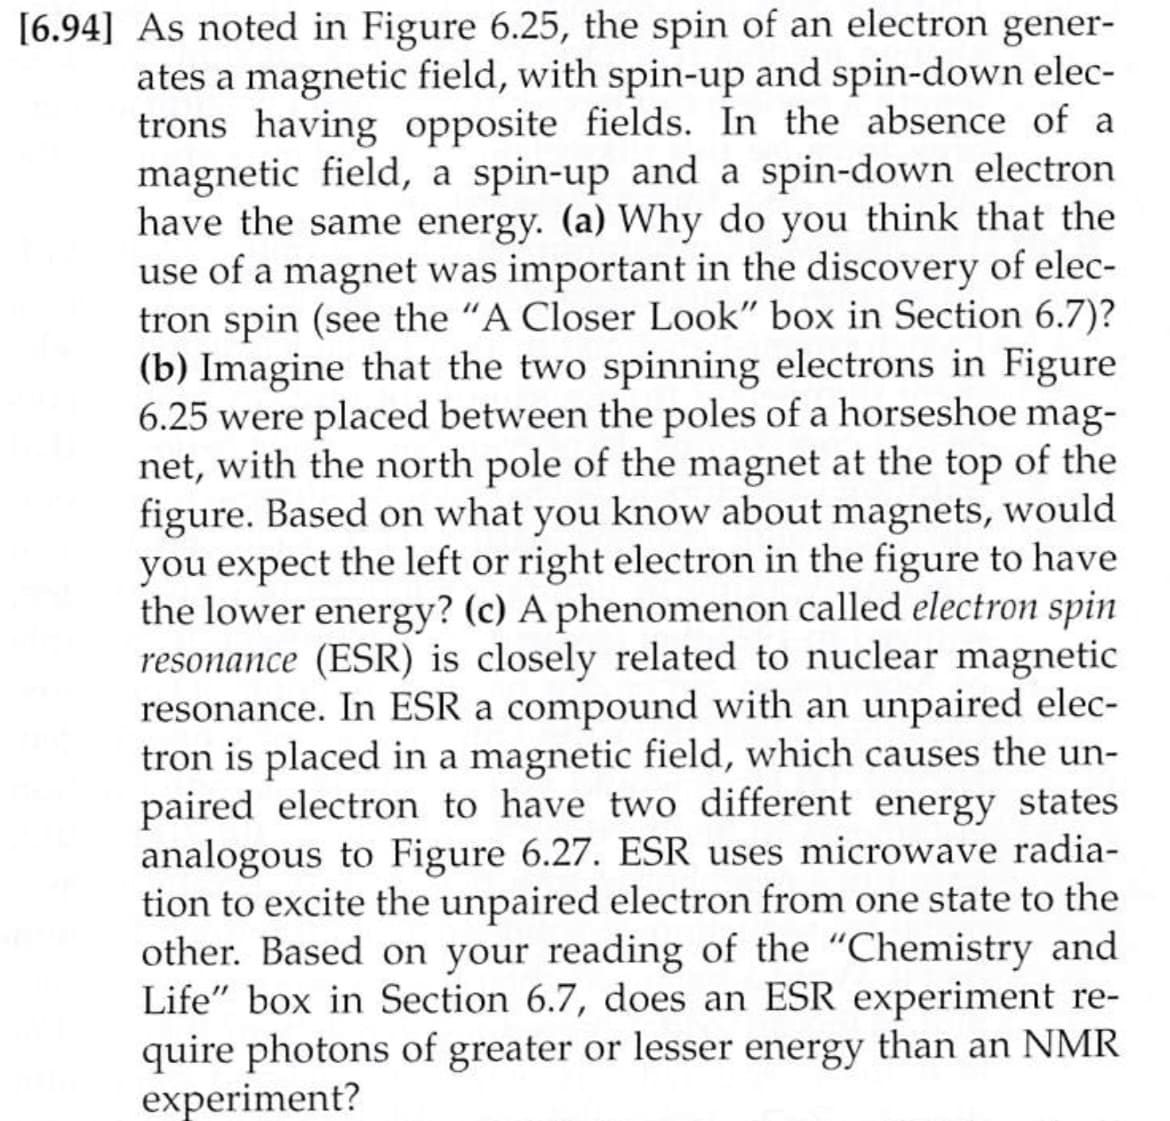 [6.94] As noted in Figure 6.25, the spin of an electron gener-
ates a magnetic field, with spin-up and spin-down elec-
trons having opposite fields. In the absence of a
magnetic field, a spin-up and a spin-down electron
have the same energy. (a) Why do you think that the
use of a magnet was important in the discovery of elec-
tron spin (see the "A Closer Look" box in Section 6.7)?
(b) Imagine that the two spinning electrons in Figure
6.25 were placed between the poles of a horseshoe mag-
net, with the north pole of the magnet at the top of the
figure. Based on what you know about magnets, would
you expect the left or right electron in the figure to have
the lower energy? (c) A phenomenon called electron spin
resonance (ESR) is closely related to nuclear magnetic
resonance. In ESR a compound with an unpaired elec-
tron is placed in a magnetic field, which causes the un-
paired electron to have two different energy states
analogous to Figure 6.27. ESR uses microwave radia-
tion to excite the unpaired electron from one state to the
other. Based on your reading of the "Chemistry and
Life" box in Section 6.7, does an ESR experiment re-
quire photons of greater or lesser energy than an NMR
experiment?
